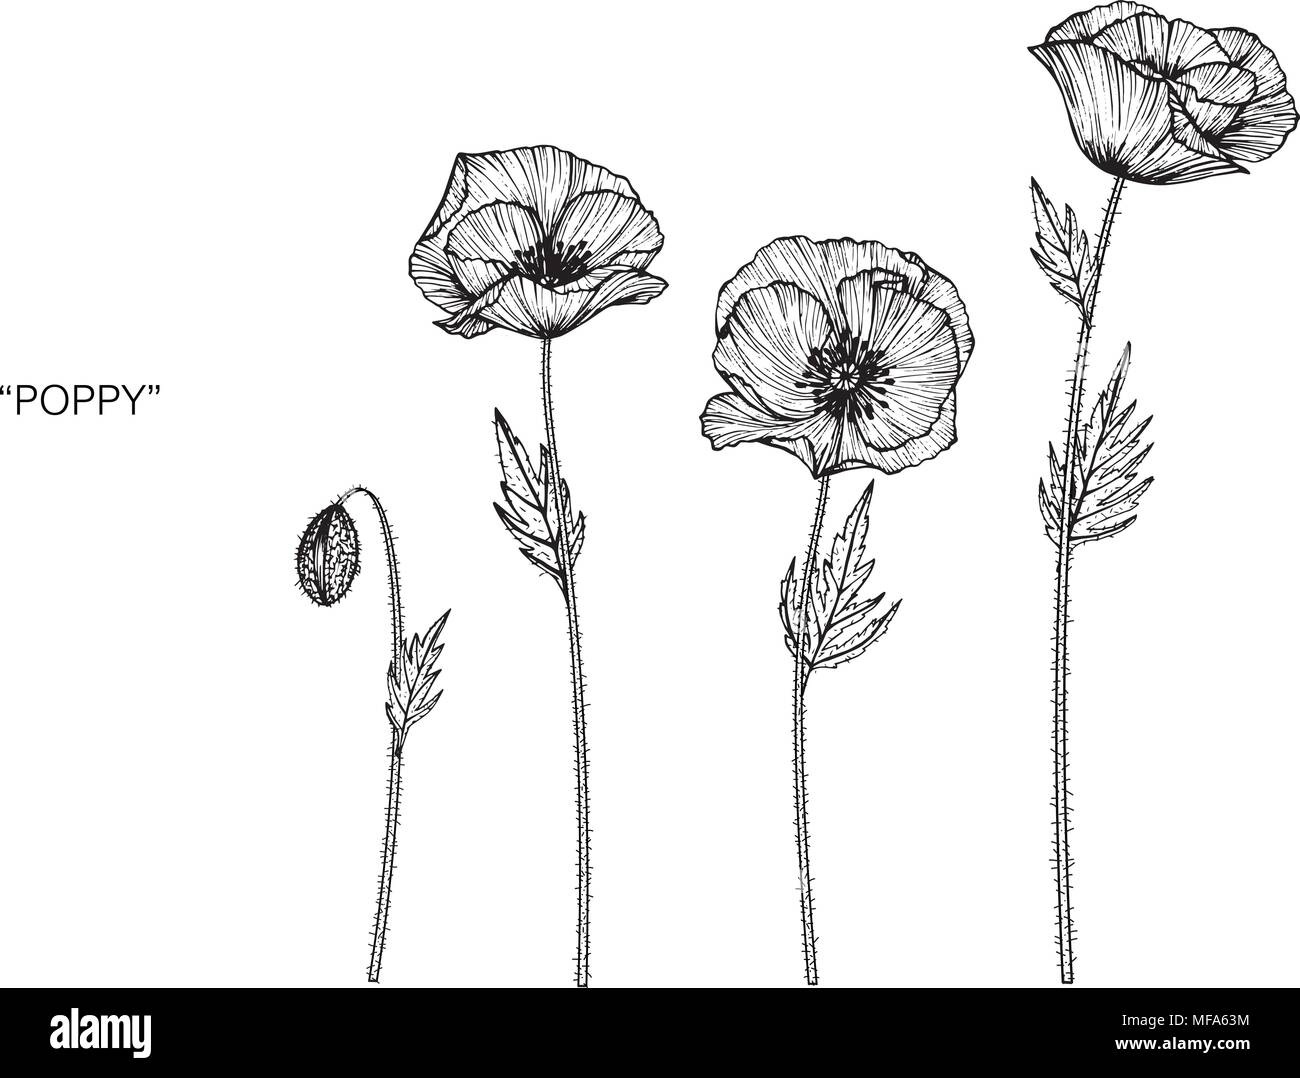 Poppy flower drawing illustration. Black and white with line art on ...